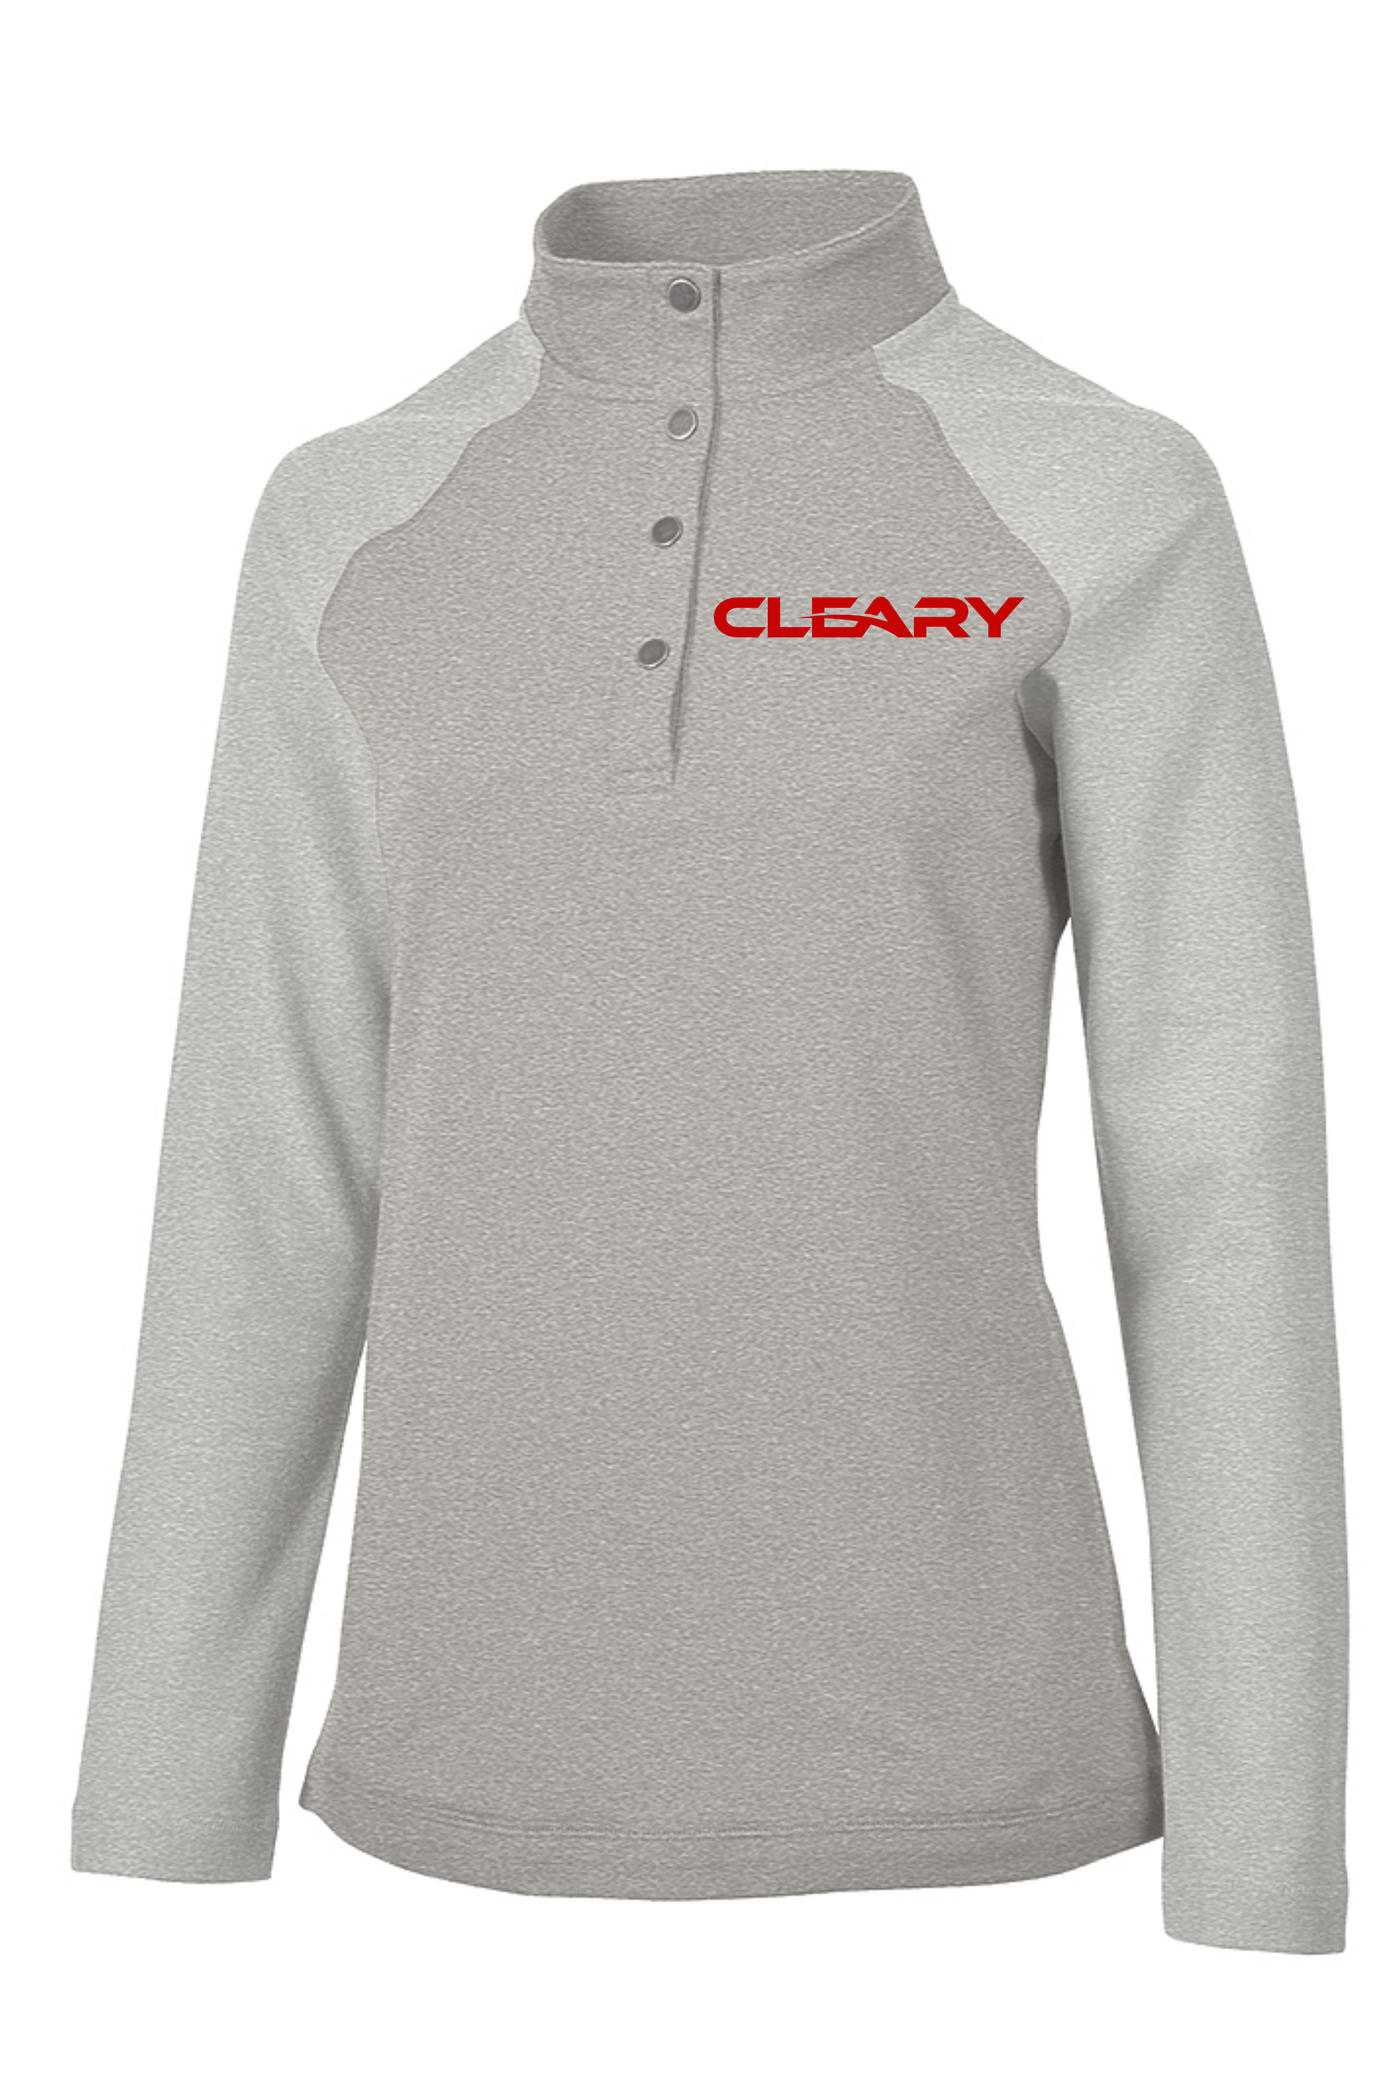 Cleary's Women's Falmouth Pullover Heather Grey